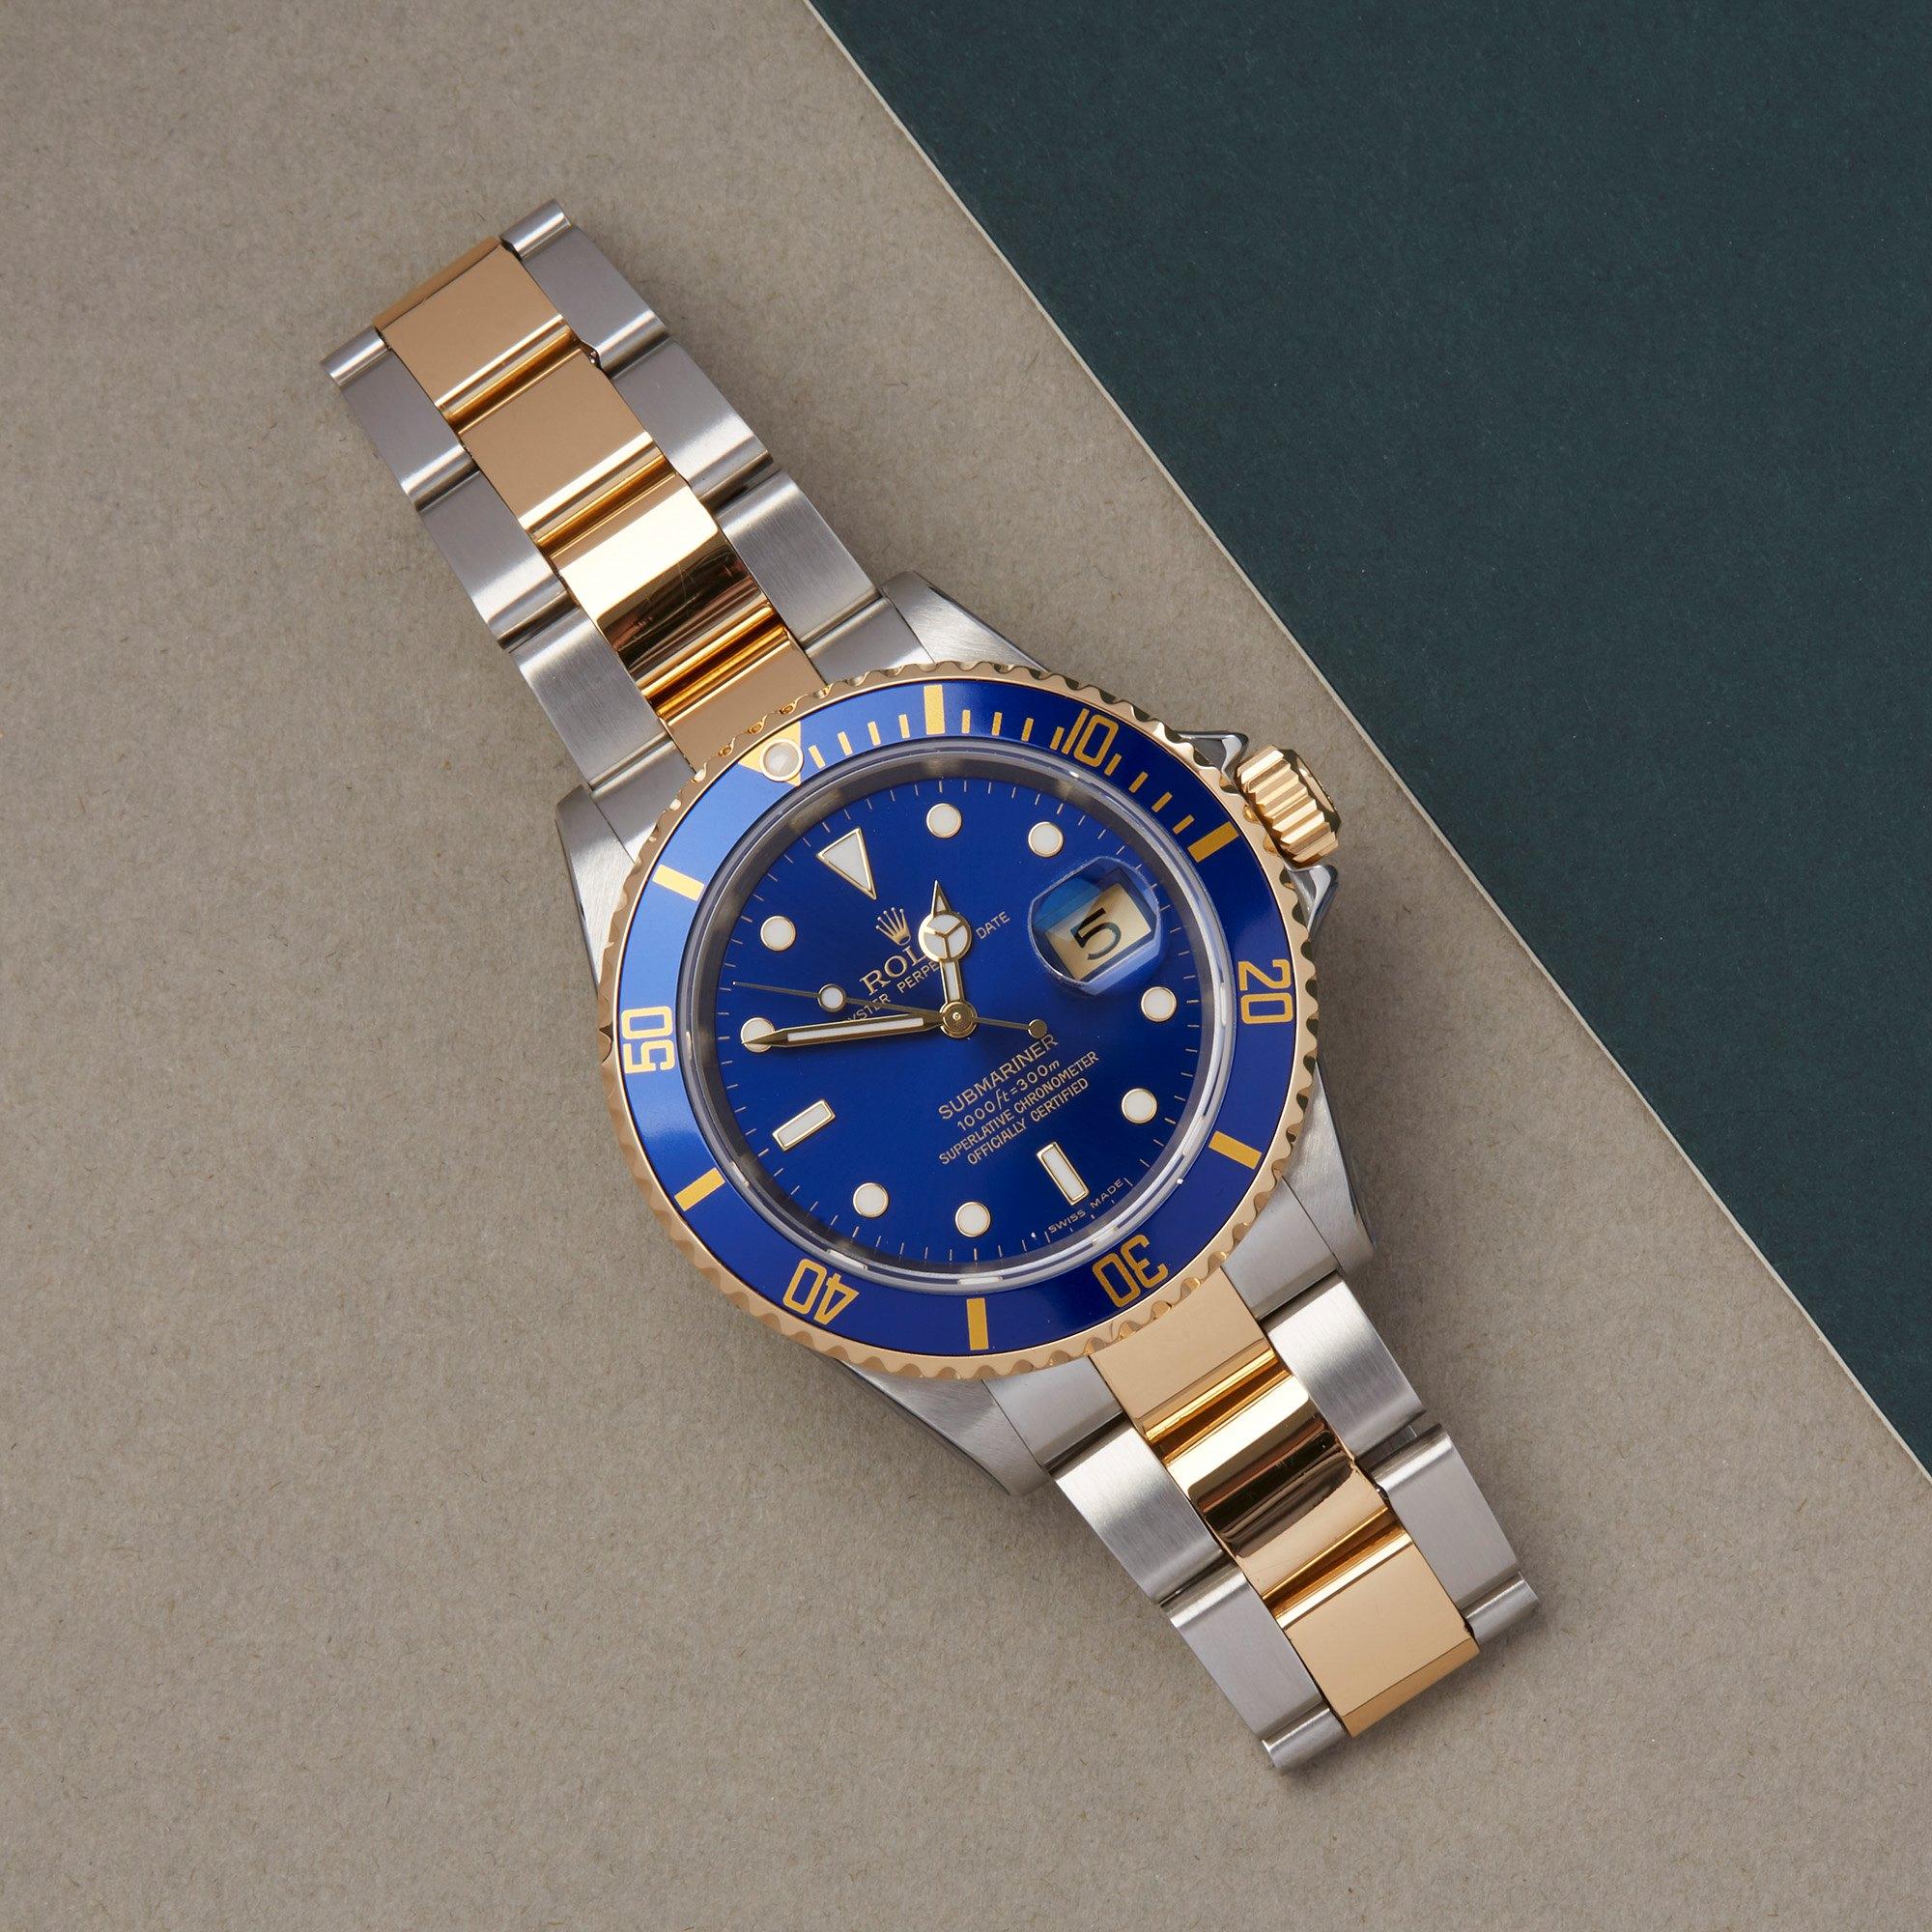 Xupes Reference: W007646
Manufacturer: Rolex
Model: Submariner
Model Variant: Date
Model Number: 16613
Age: 2006
Gender: Men
Complete With: Rolex Box, Manuals, Guarantee, Card Holder & Swing Tag
Dial: Blue Other
Glass: Sapphire Crystal
Case Size: